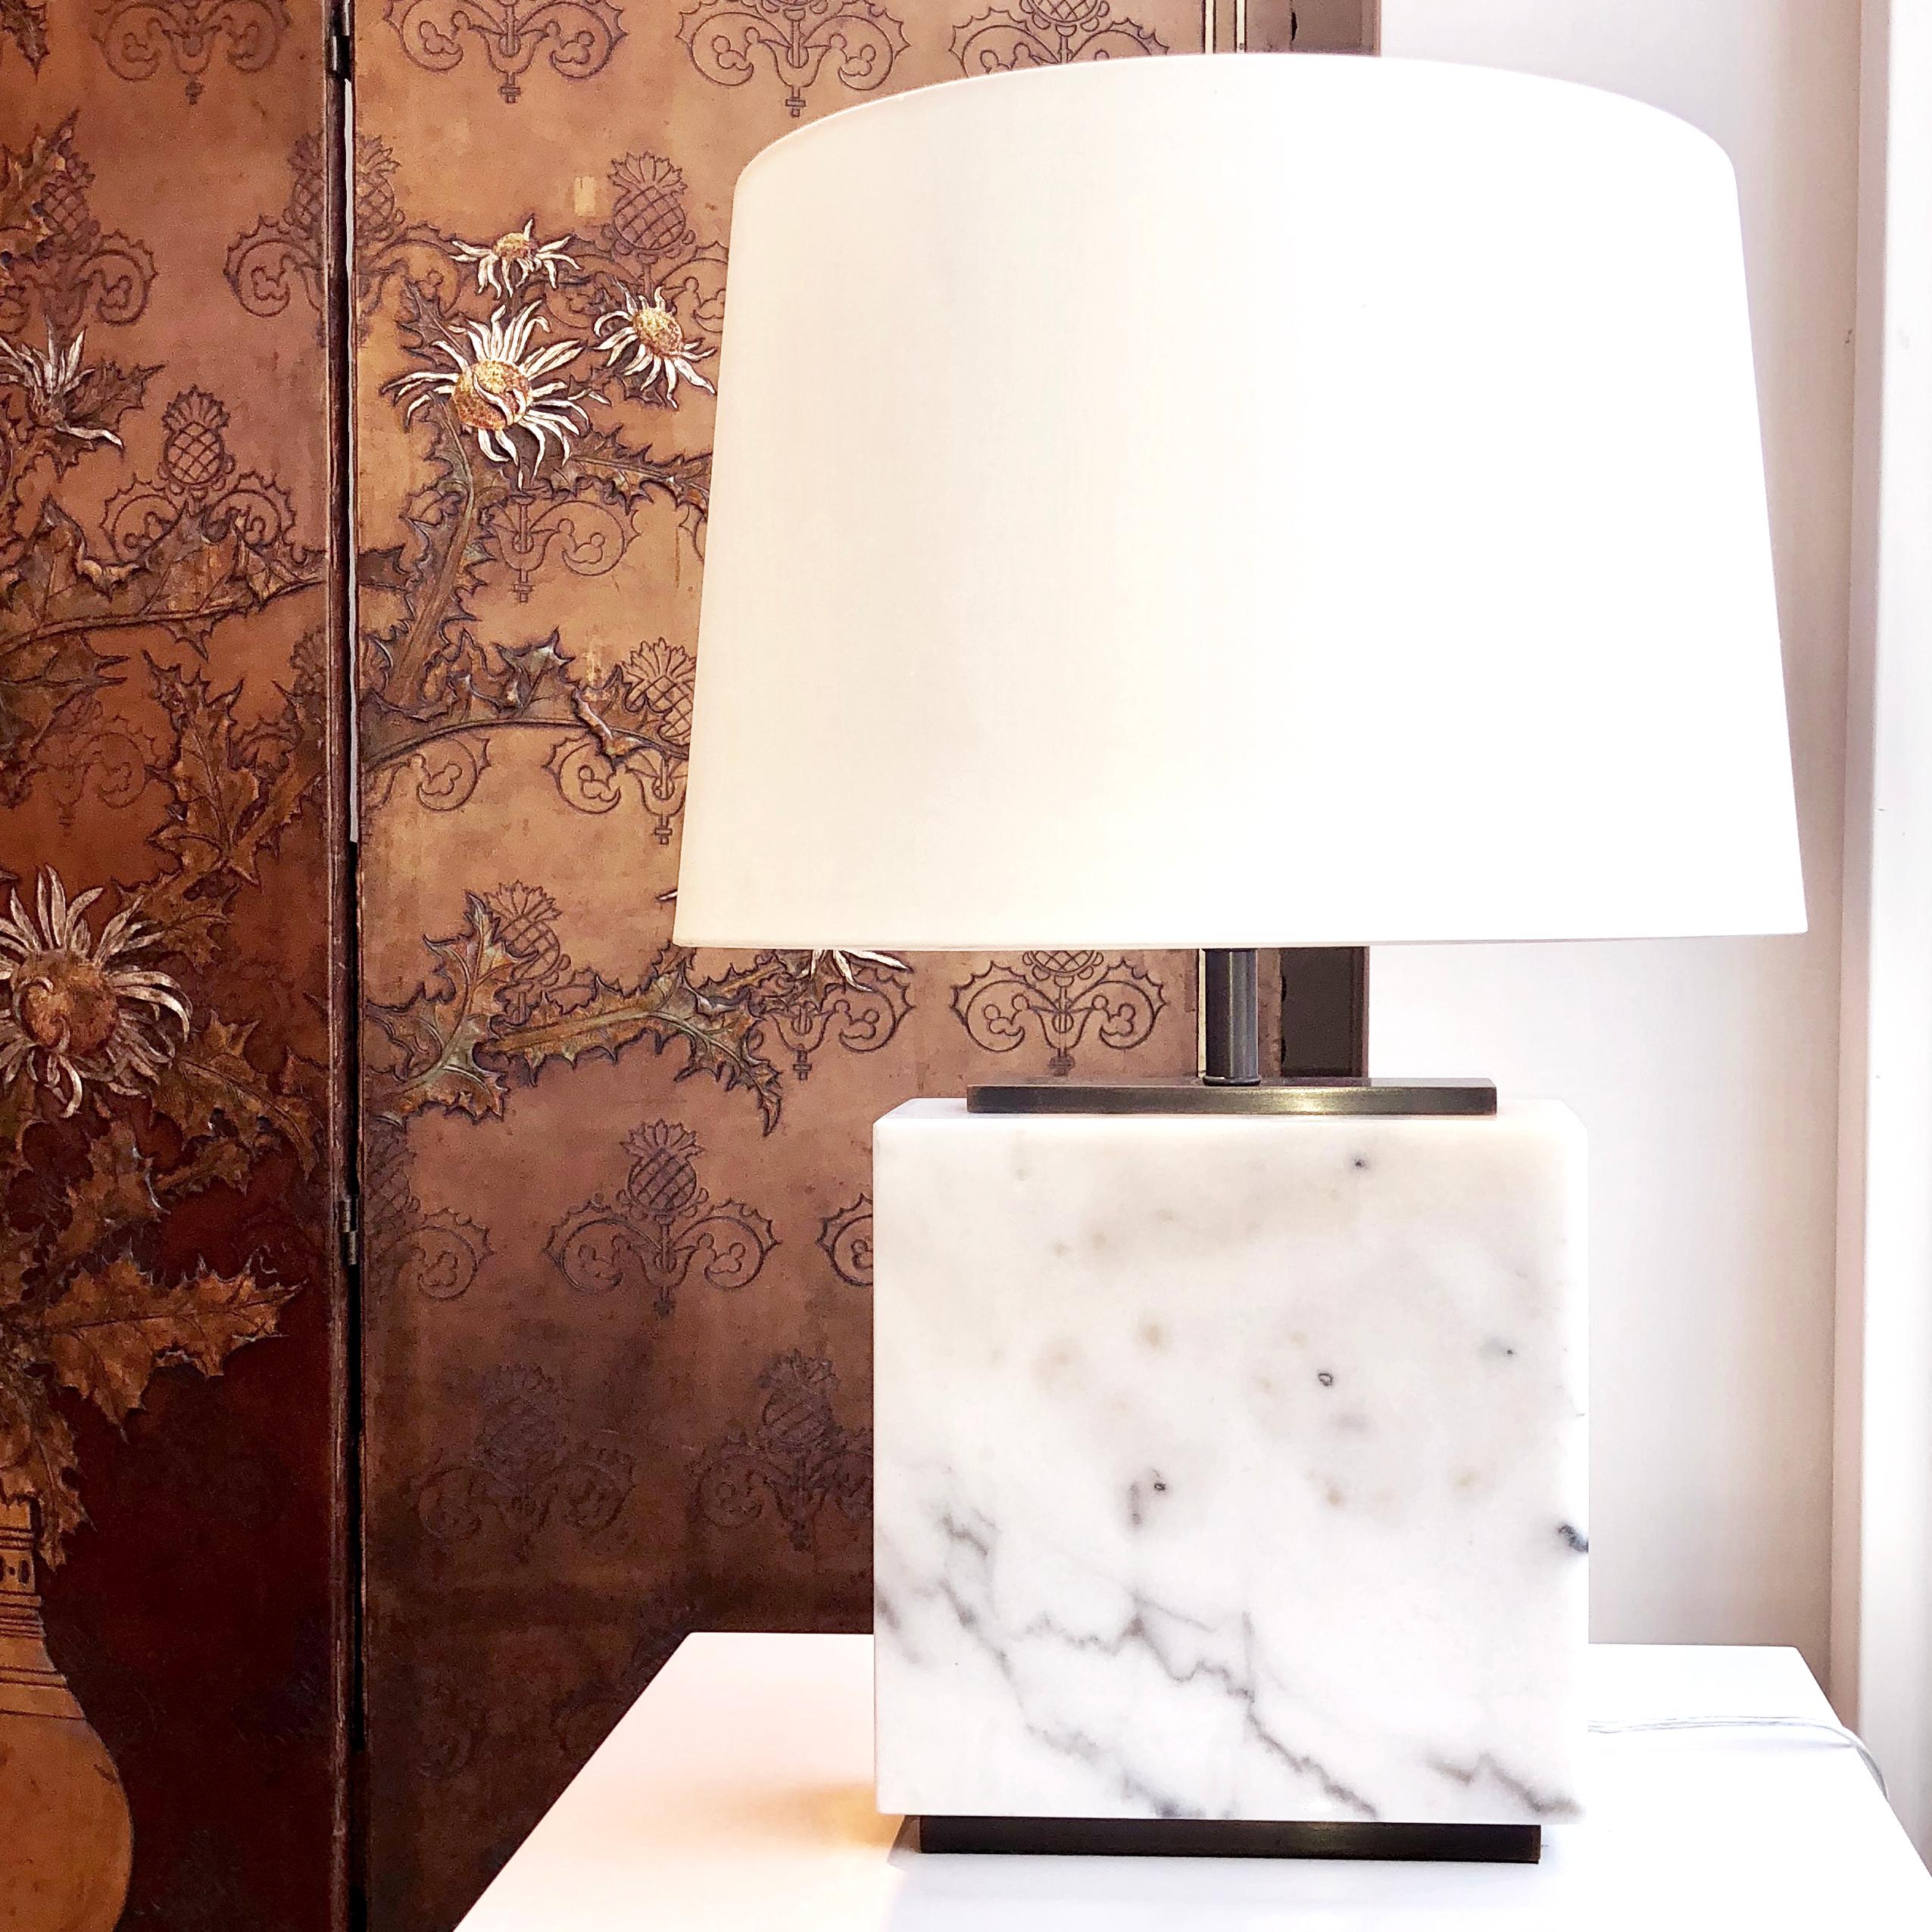 European Hector White Marble Table Lamp For Sale